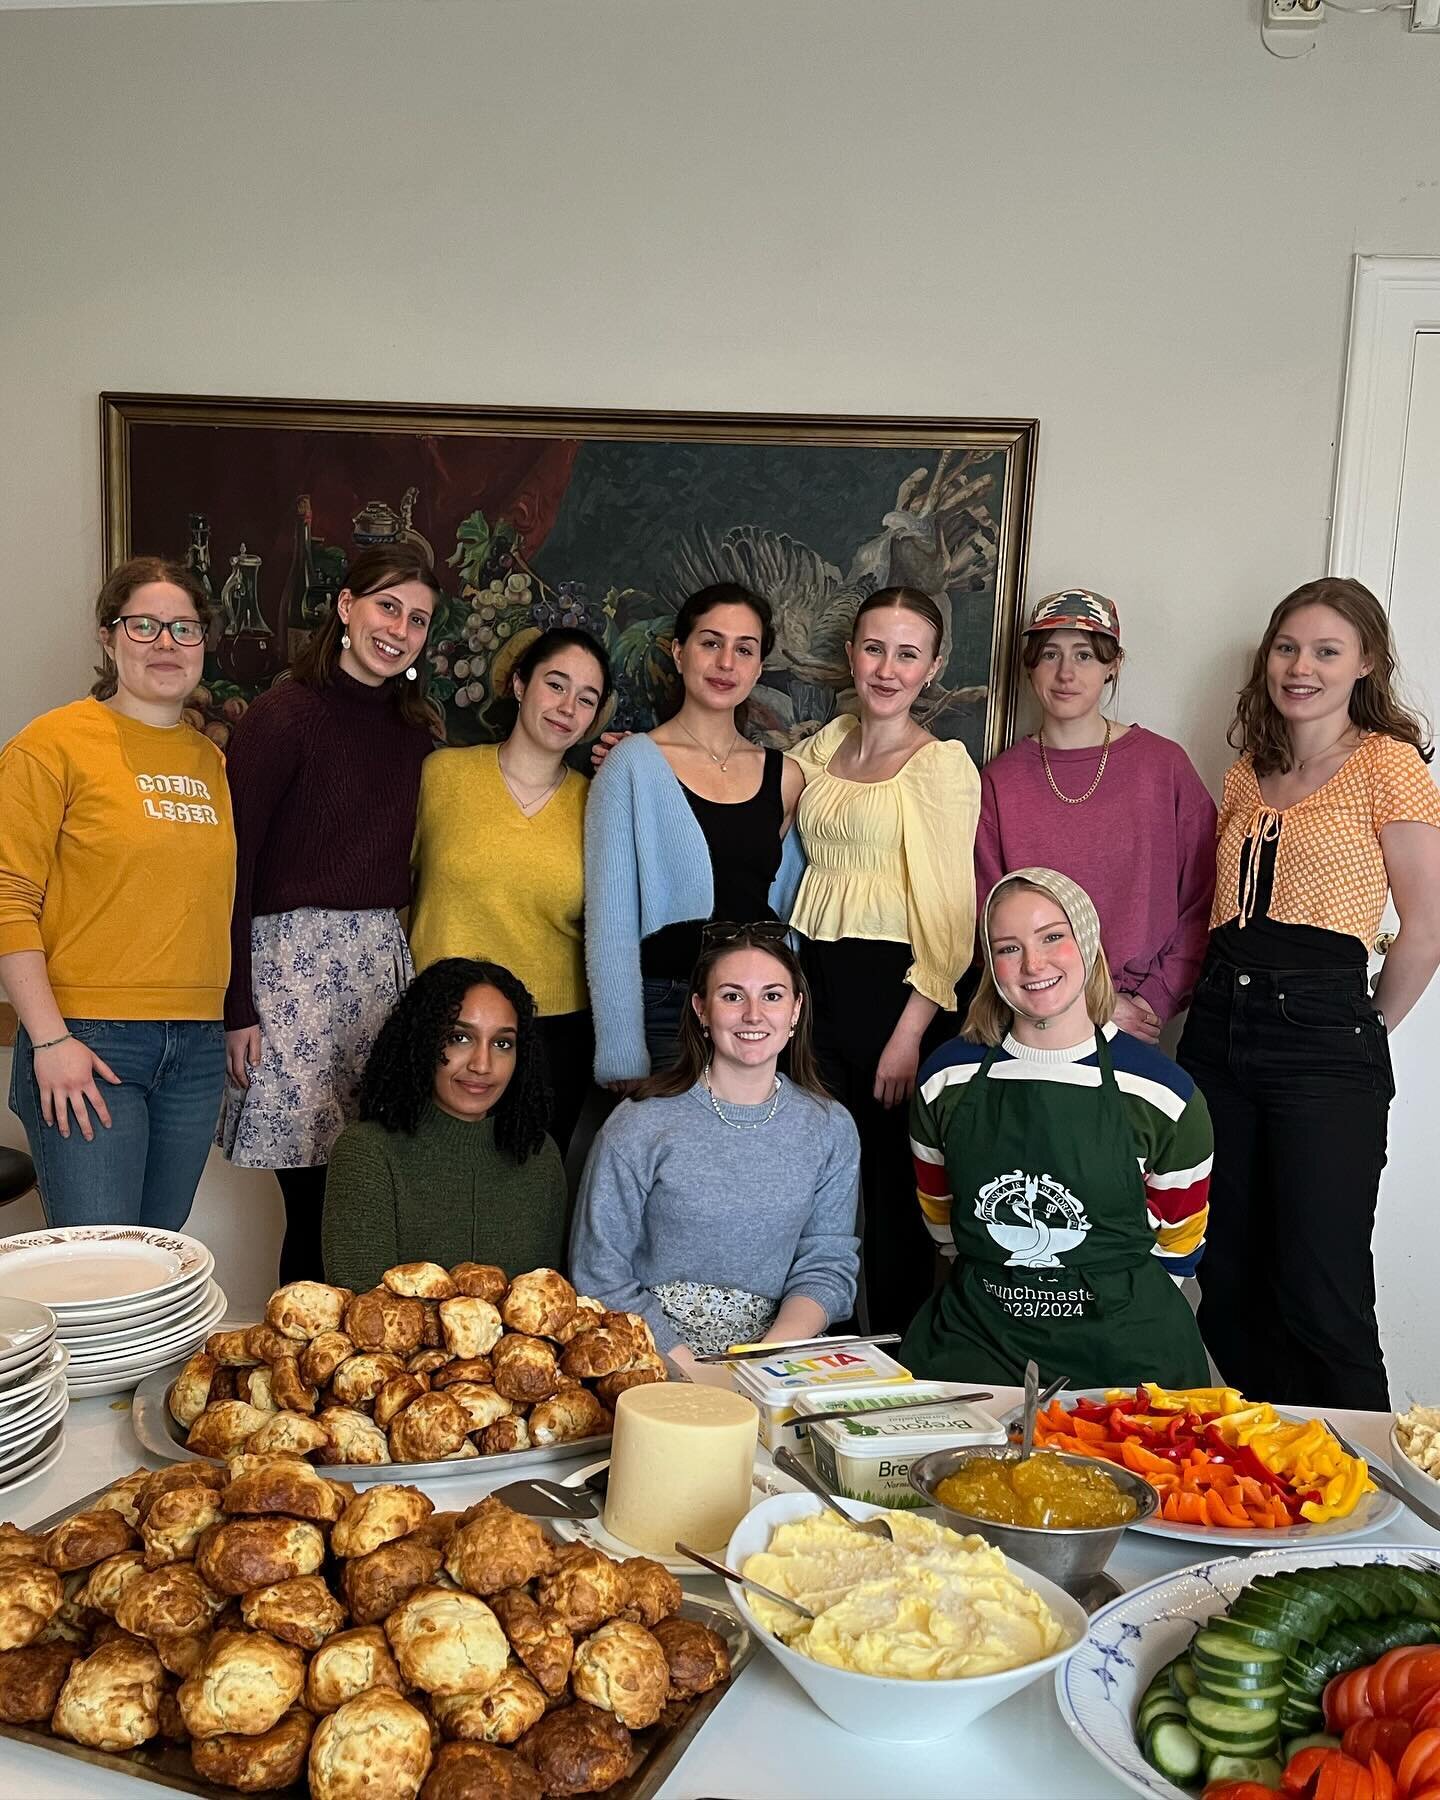 🌷🐣easter brunch🐣🌷
The spring spirit is finally here (if not in reality at least in our hearts) and that means easter is around the corner!☀️To greet the season, we had a little early easter brunch today at Locus with lots of scones, pancakes, egg